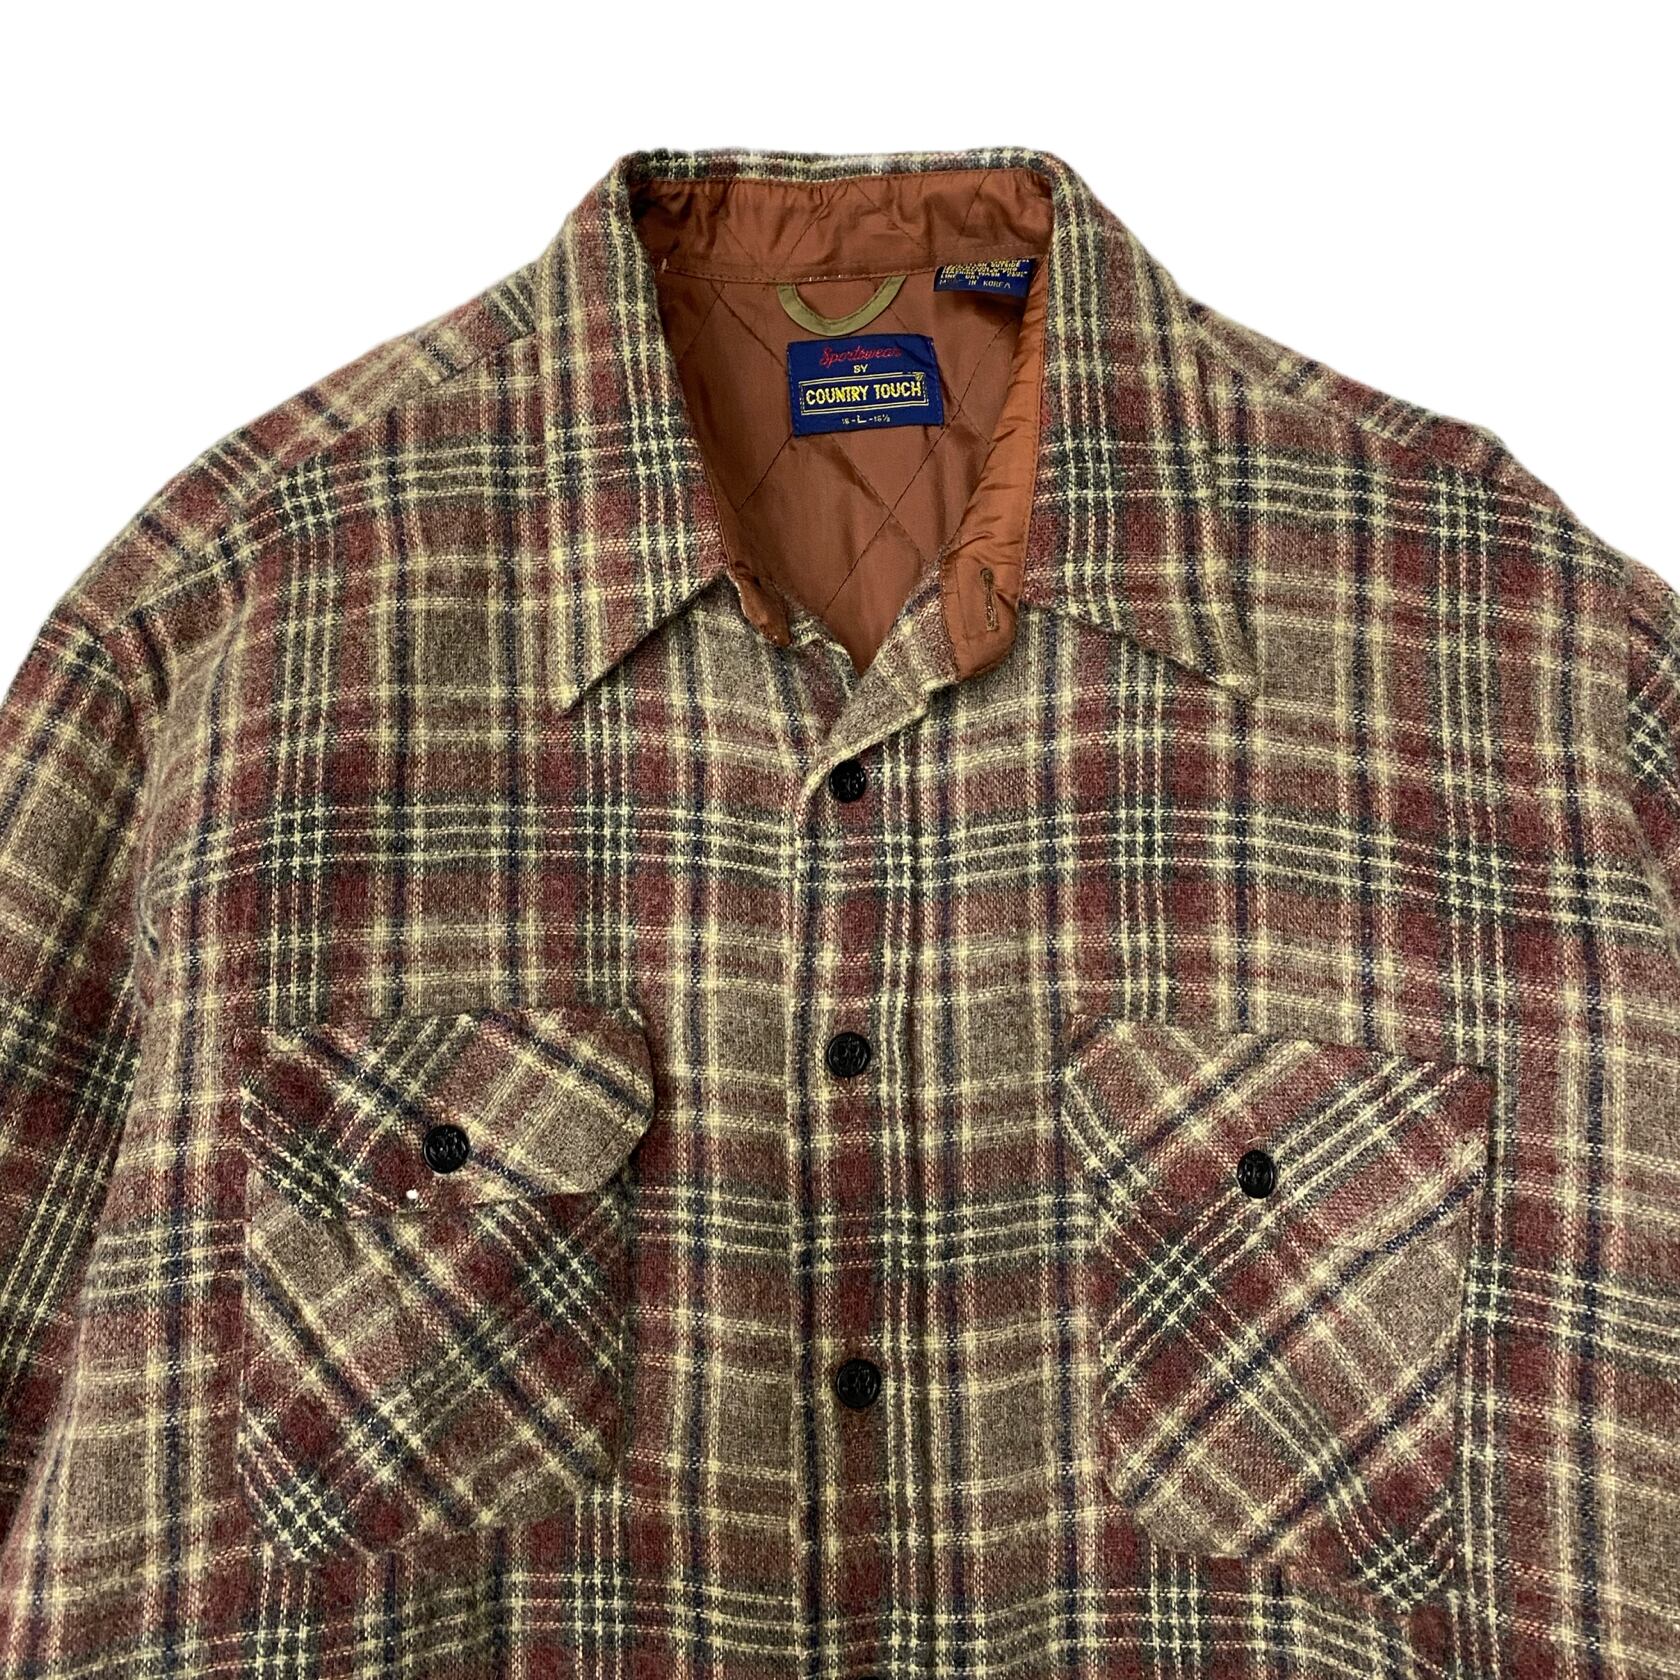 Country Touch Check Shirts | Good scarP powered by BASE